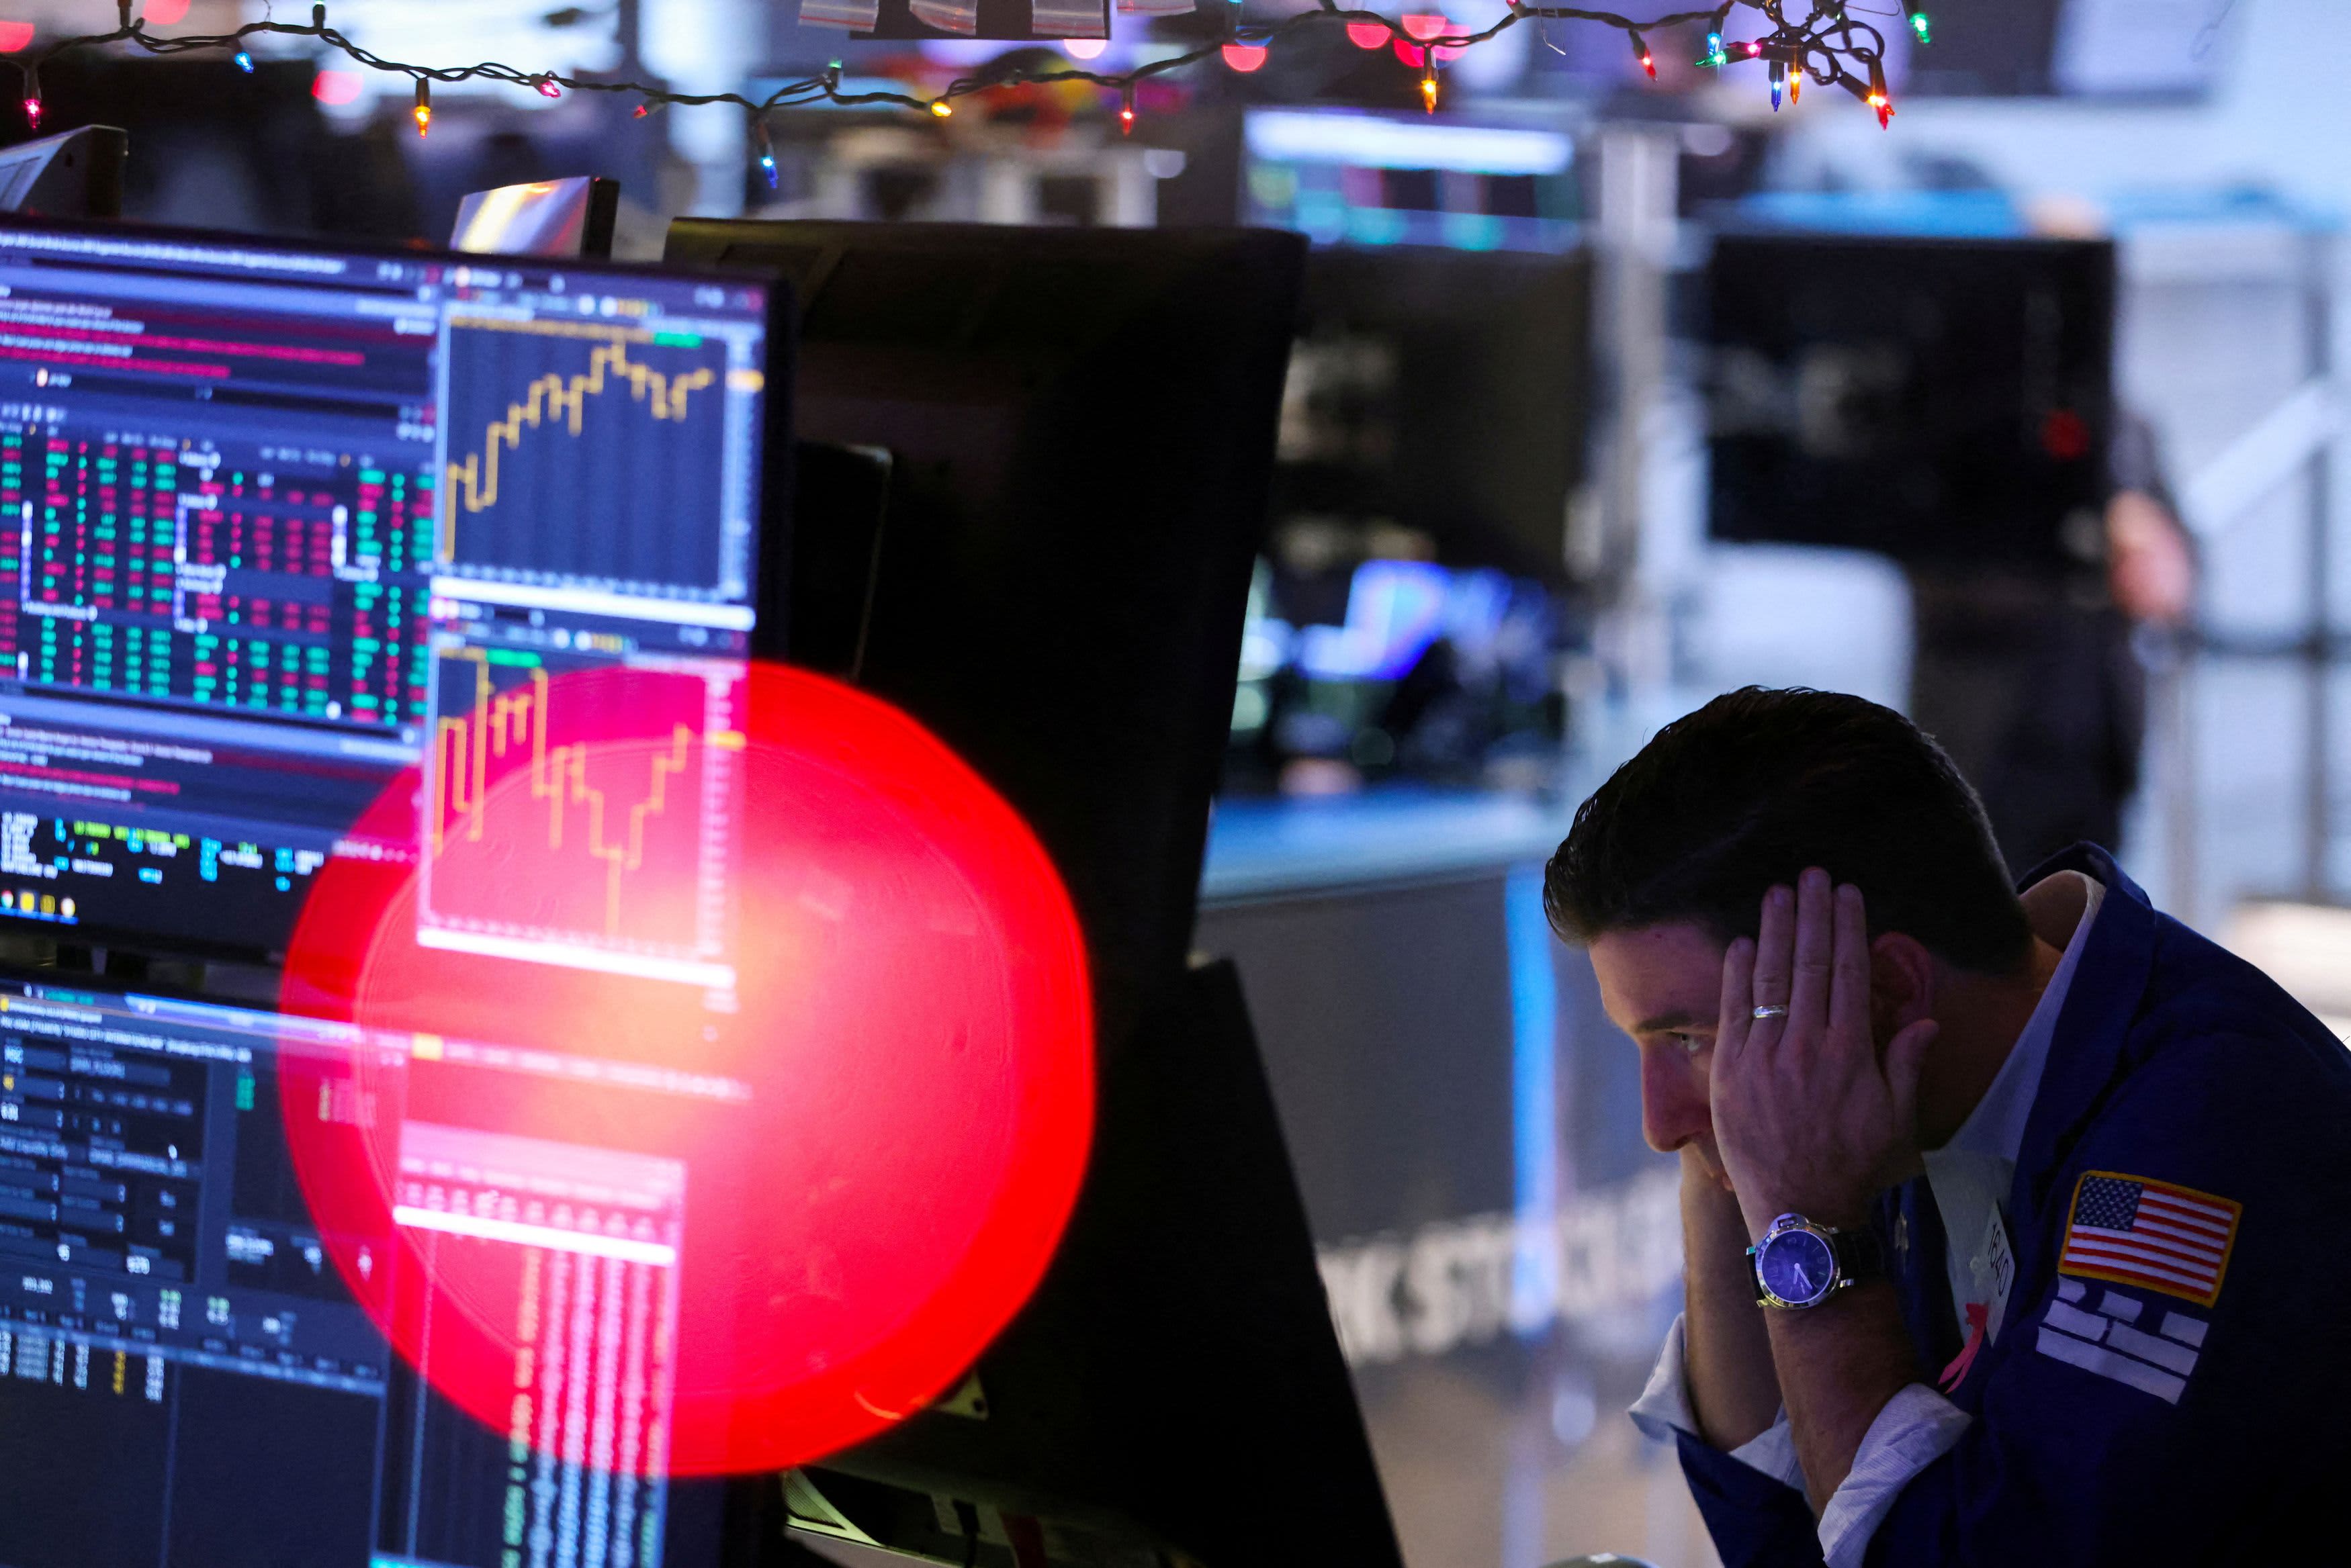 Top Wall Street strategists see a bumpy 2023 ahead with minimal returns for stocks